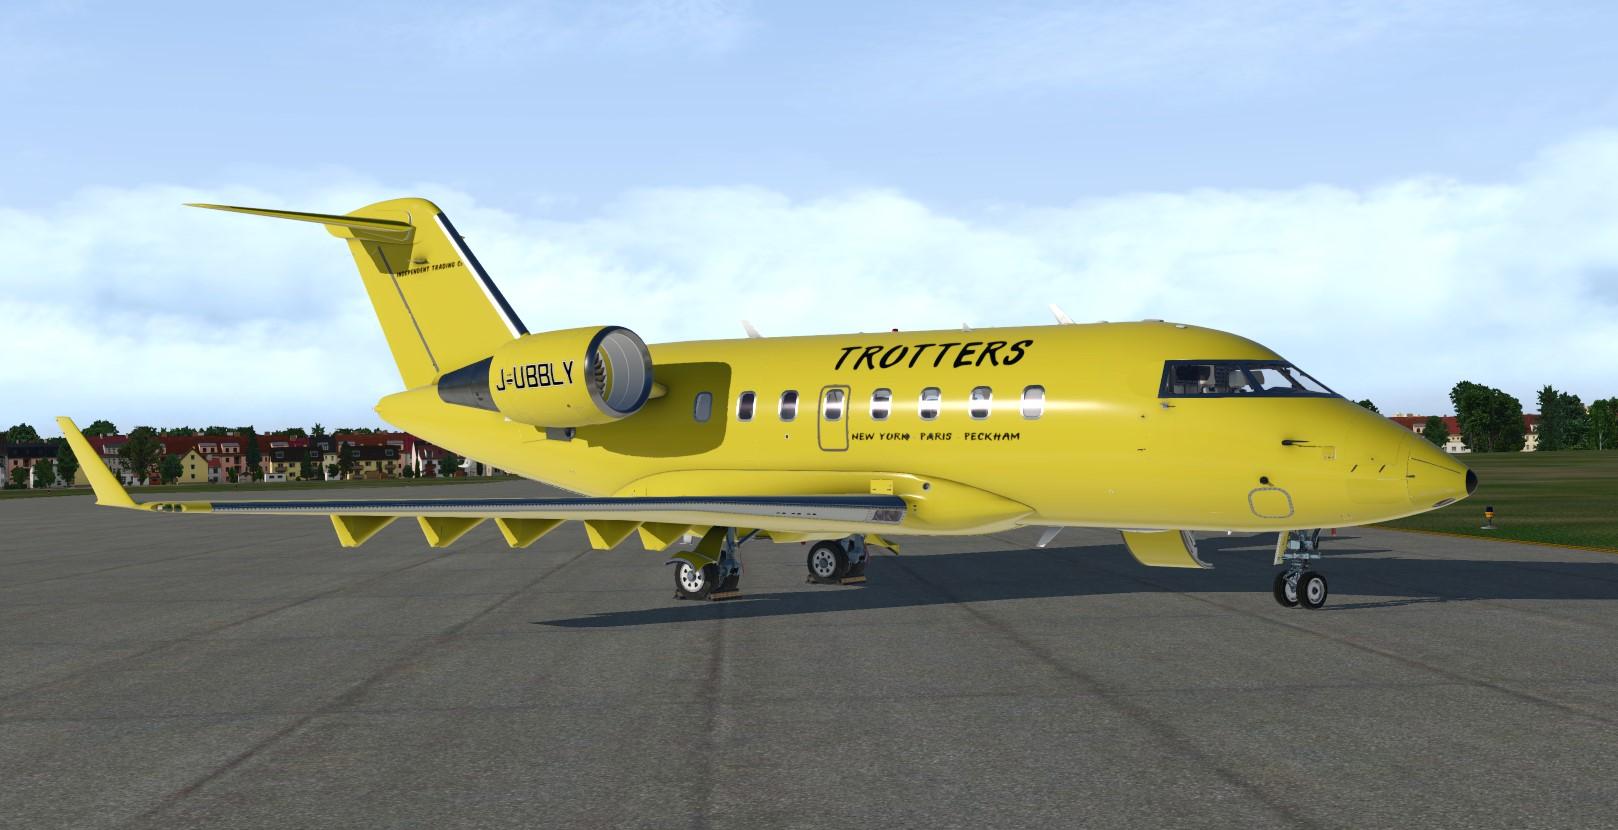 More information about "Trotter's Private Jet (Clean)"